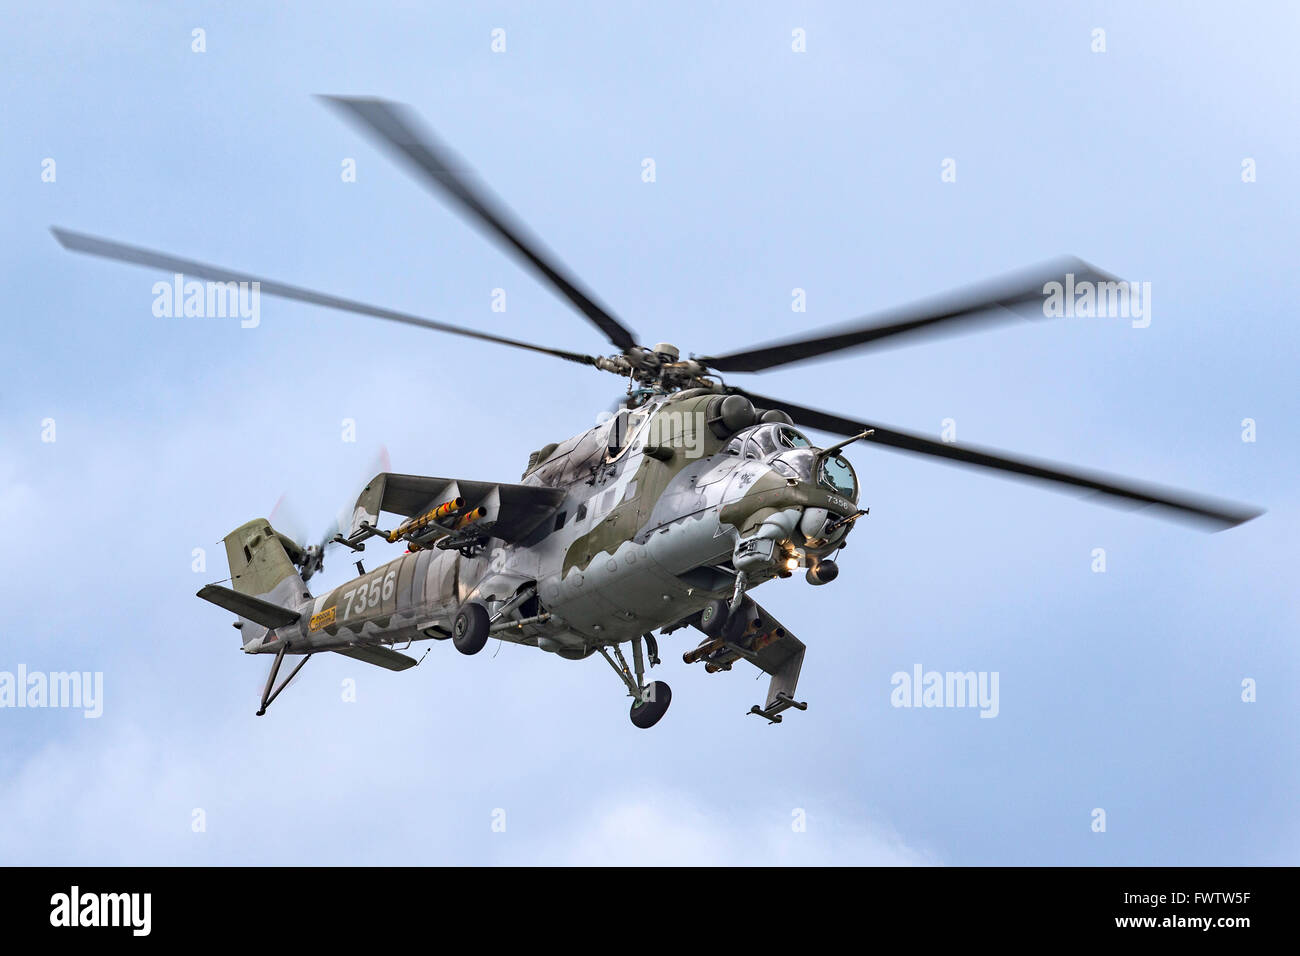 Czech Republic Air Force Mil Mi-24V Attack Helicopter Stock Photo